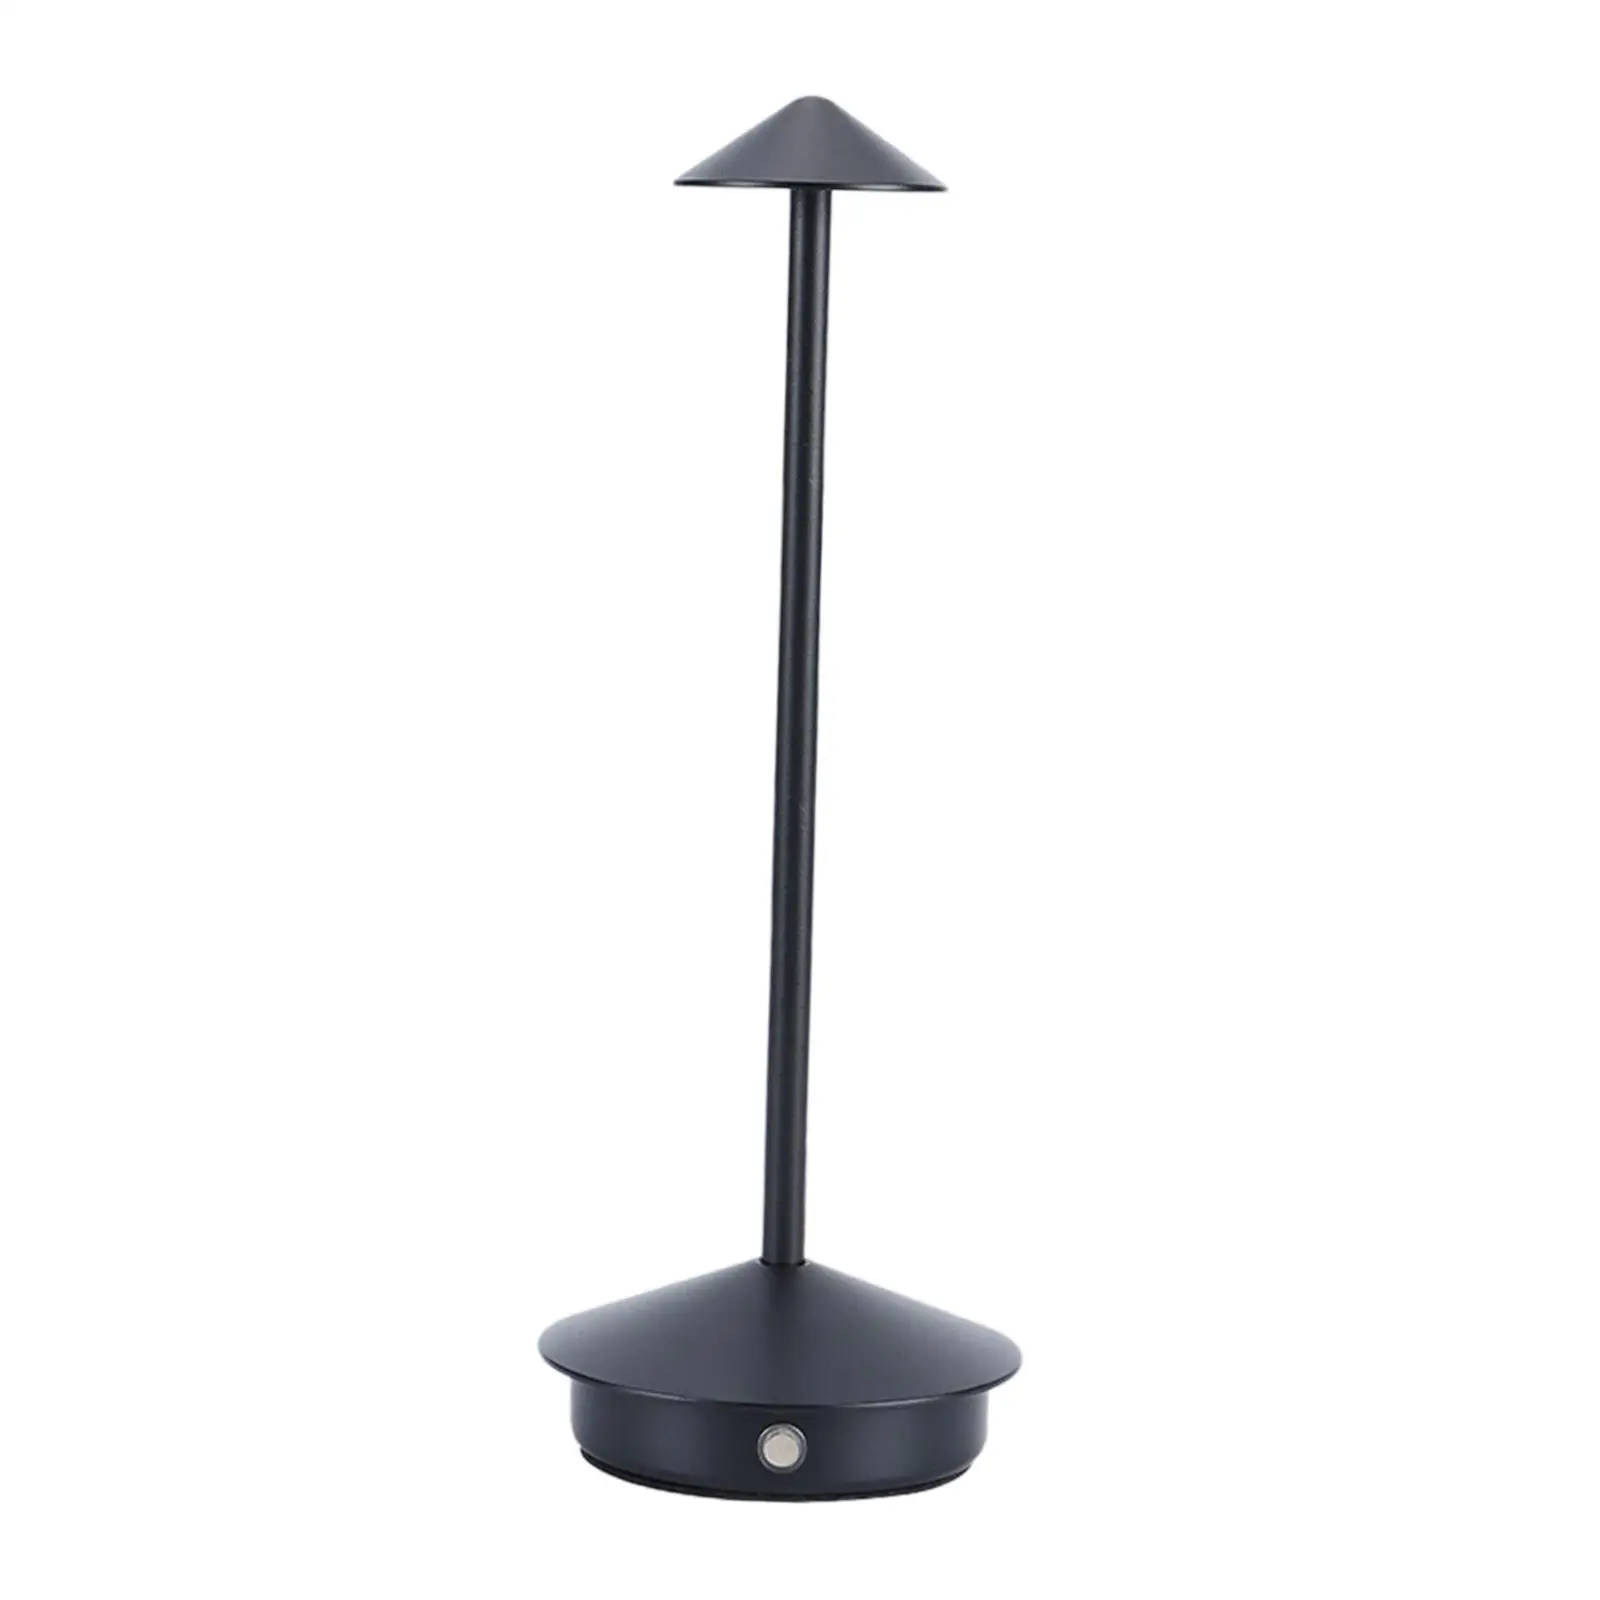 Bedside Table Lamp Dimmable Decorative Desk Lamp Touch Adjustable Brightness Acrylic Lamp Shade LED Night Light for Dorm Sofa